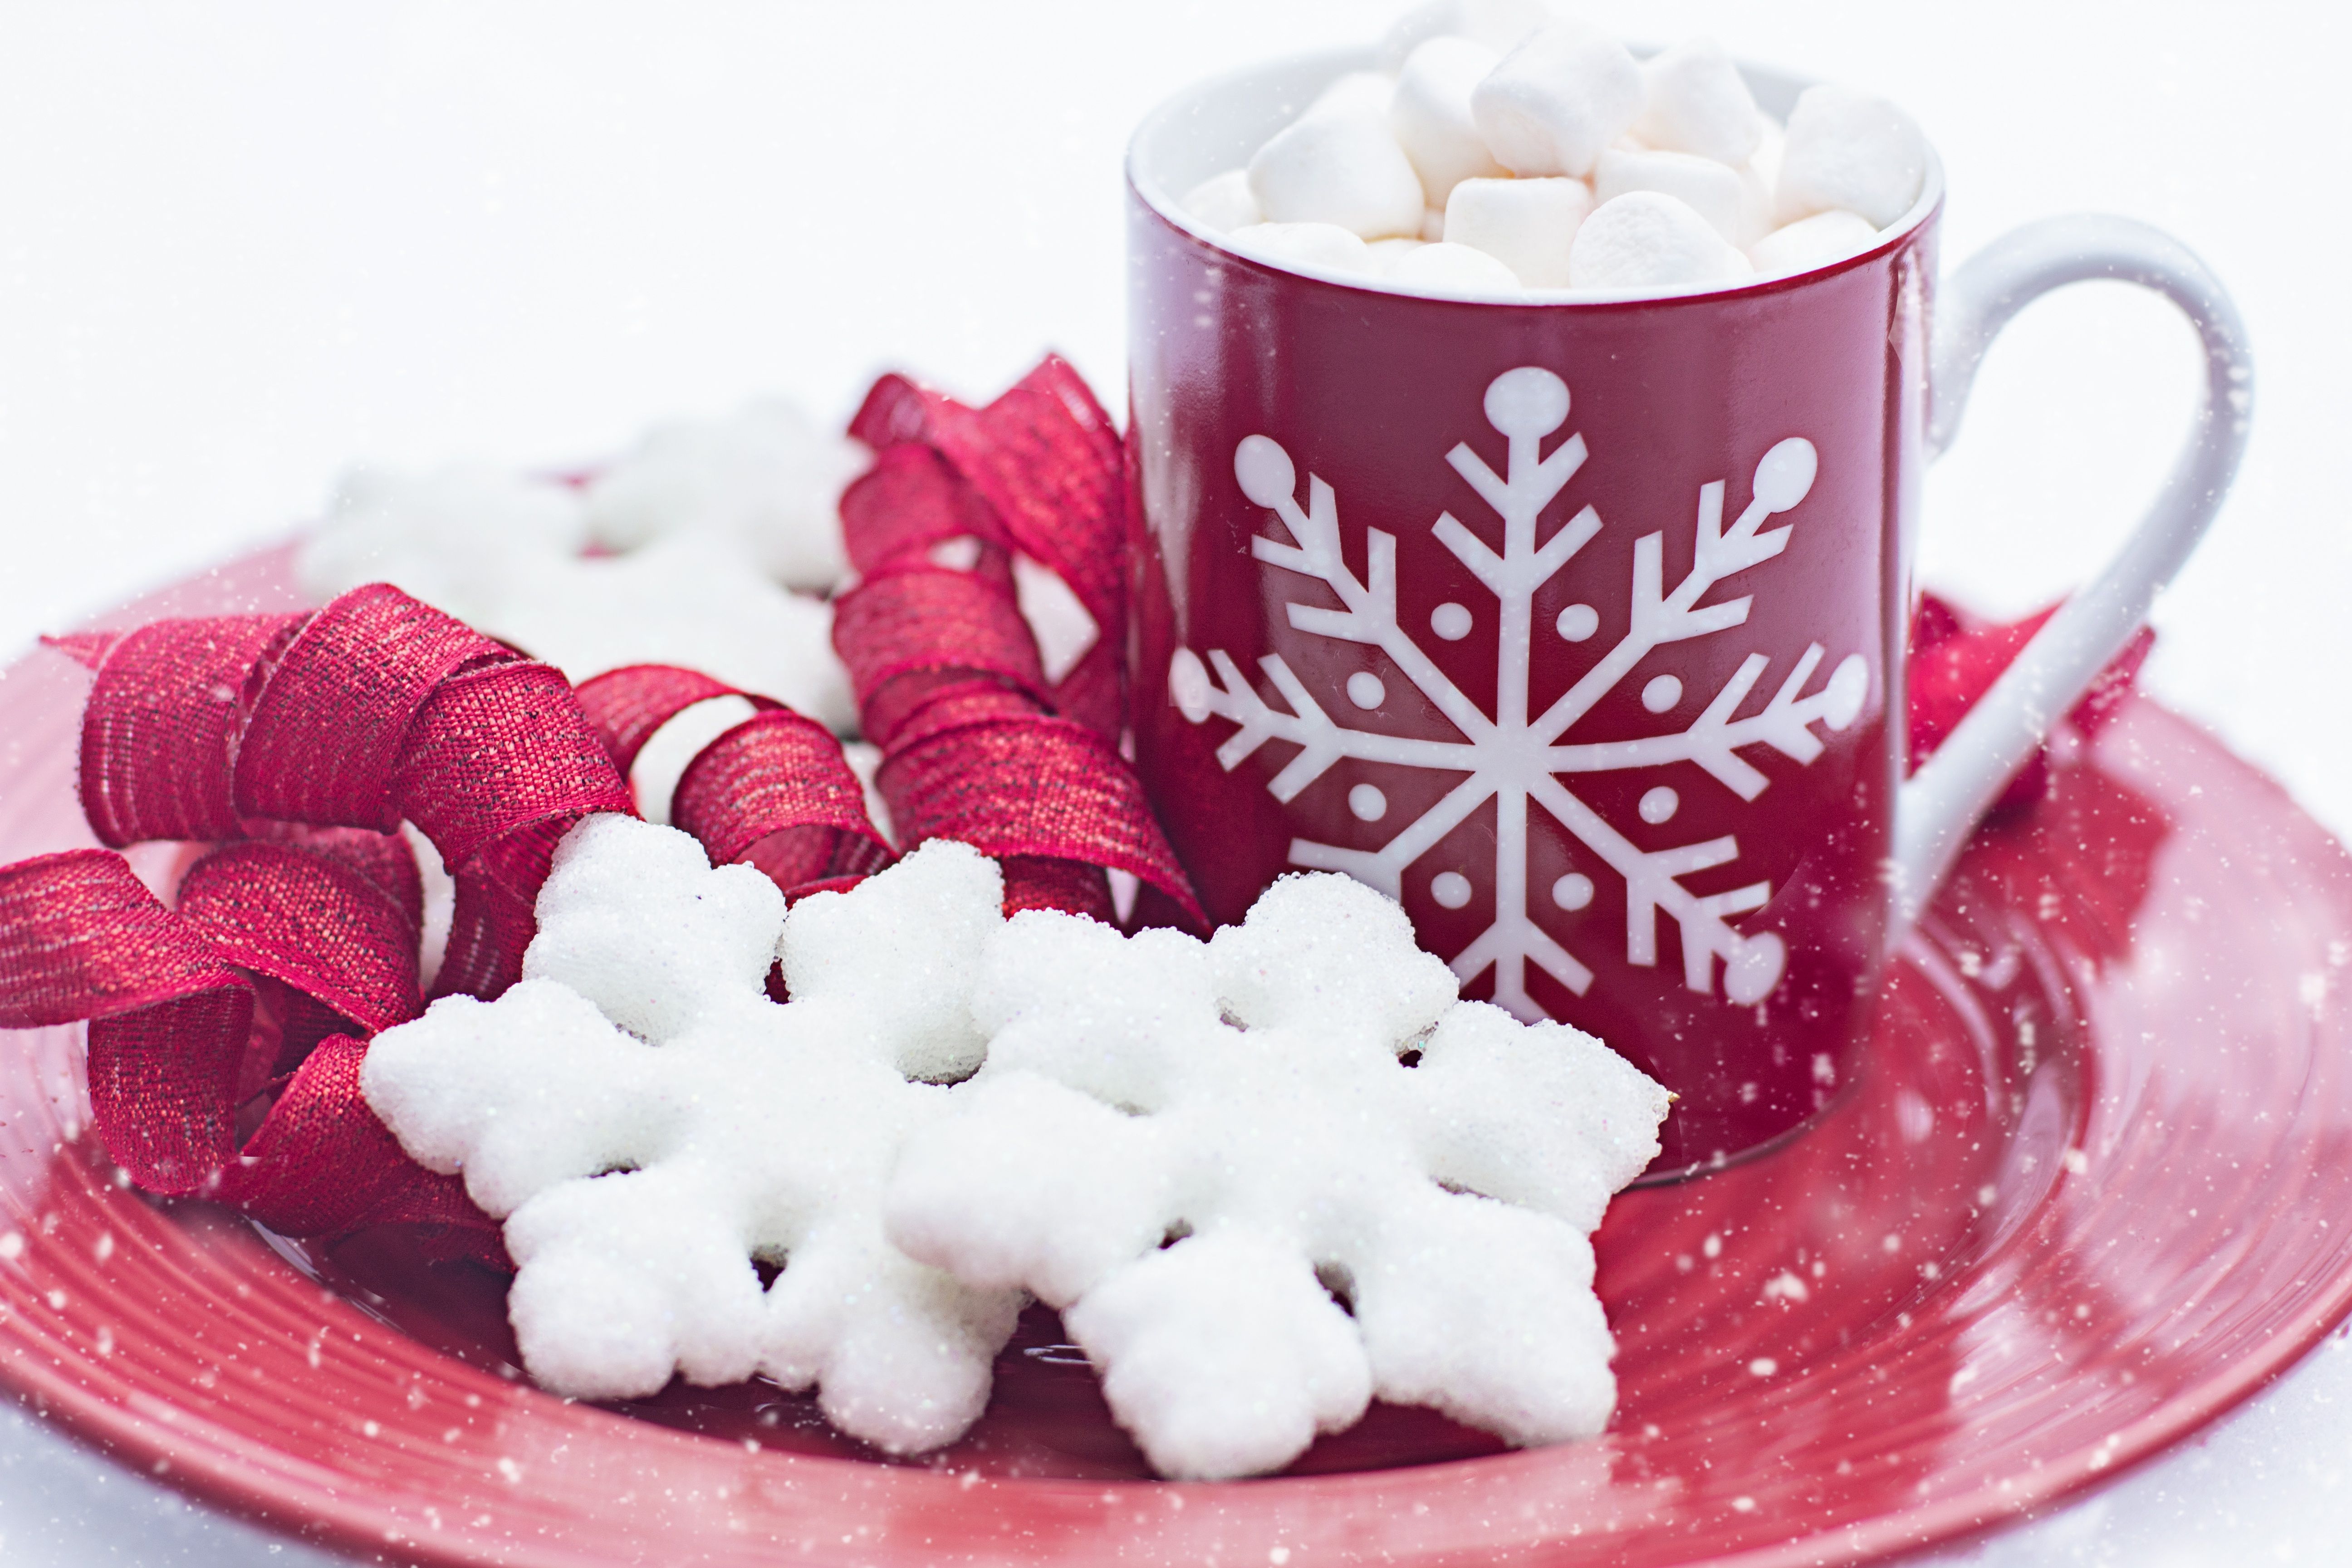 Gallery by tag: hot chocolate wallpaper